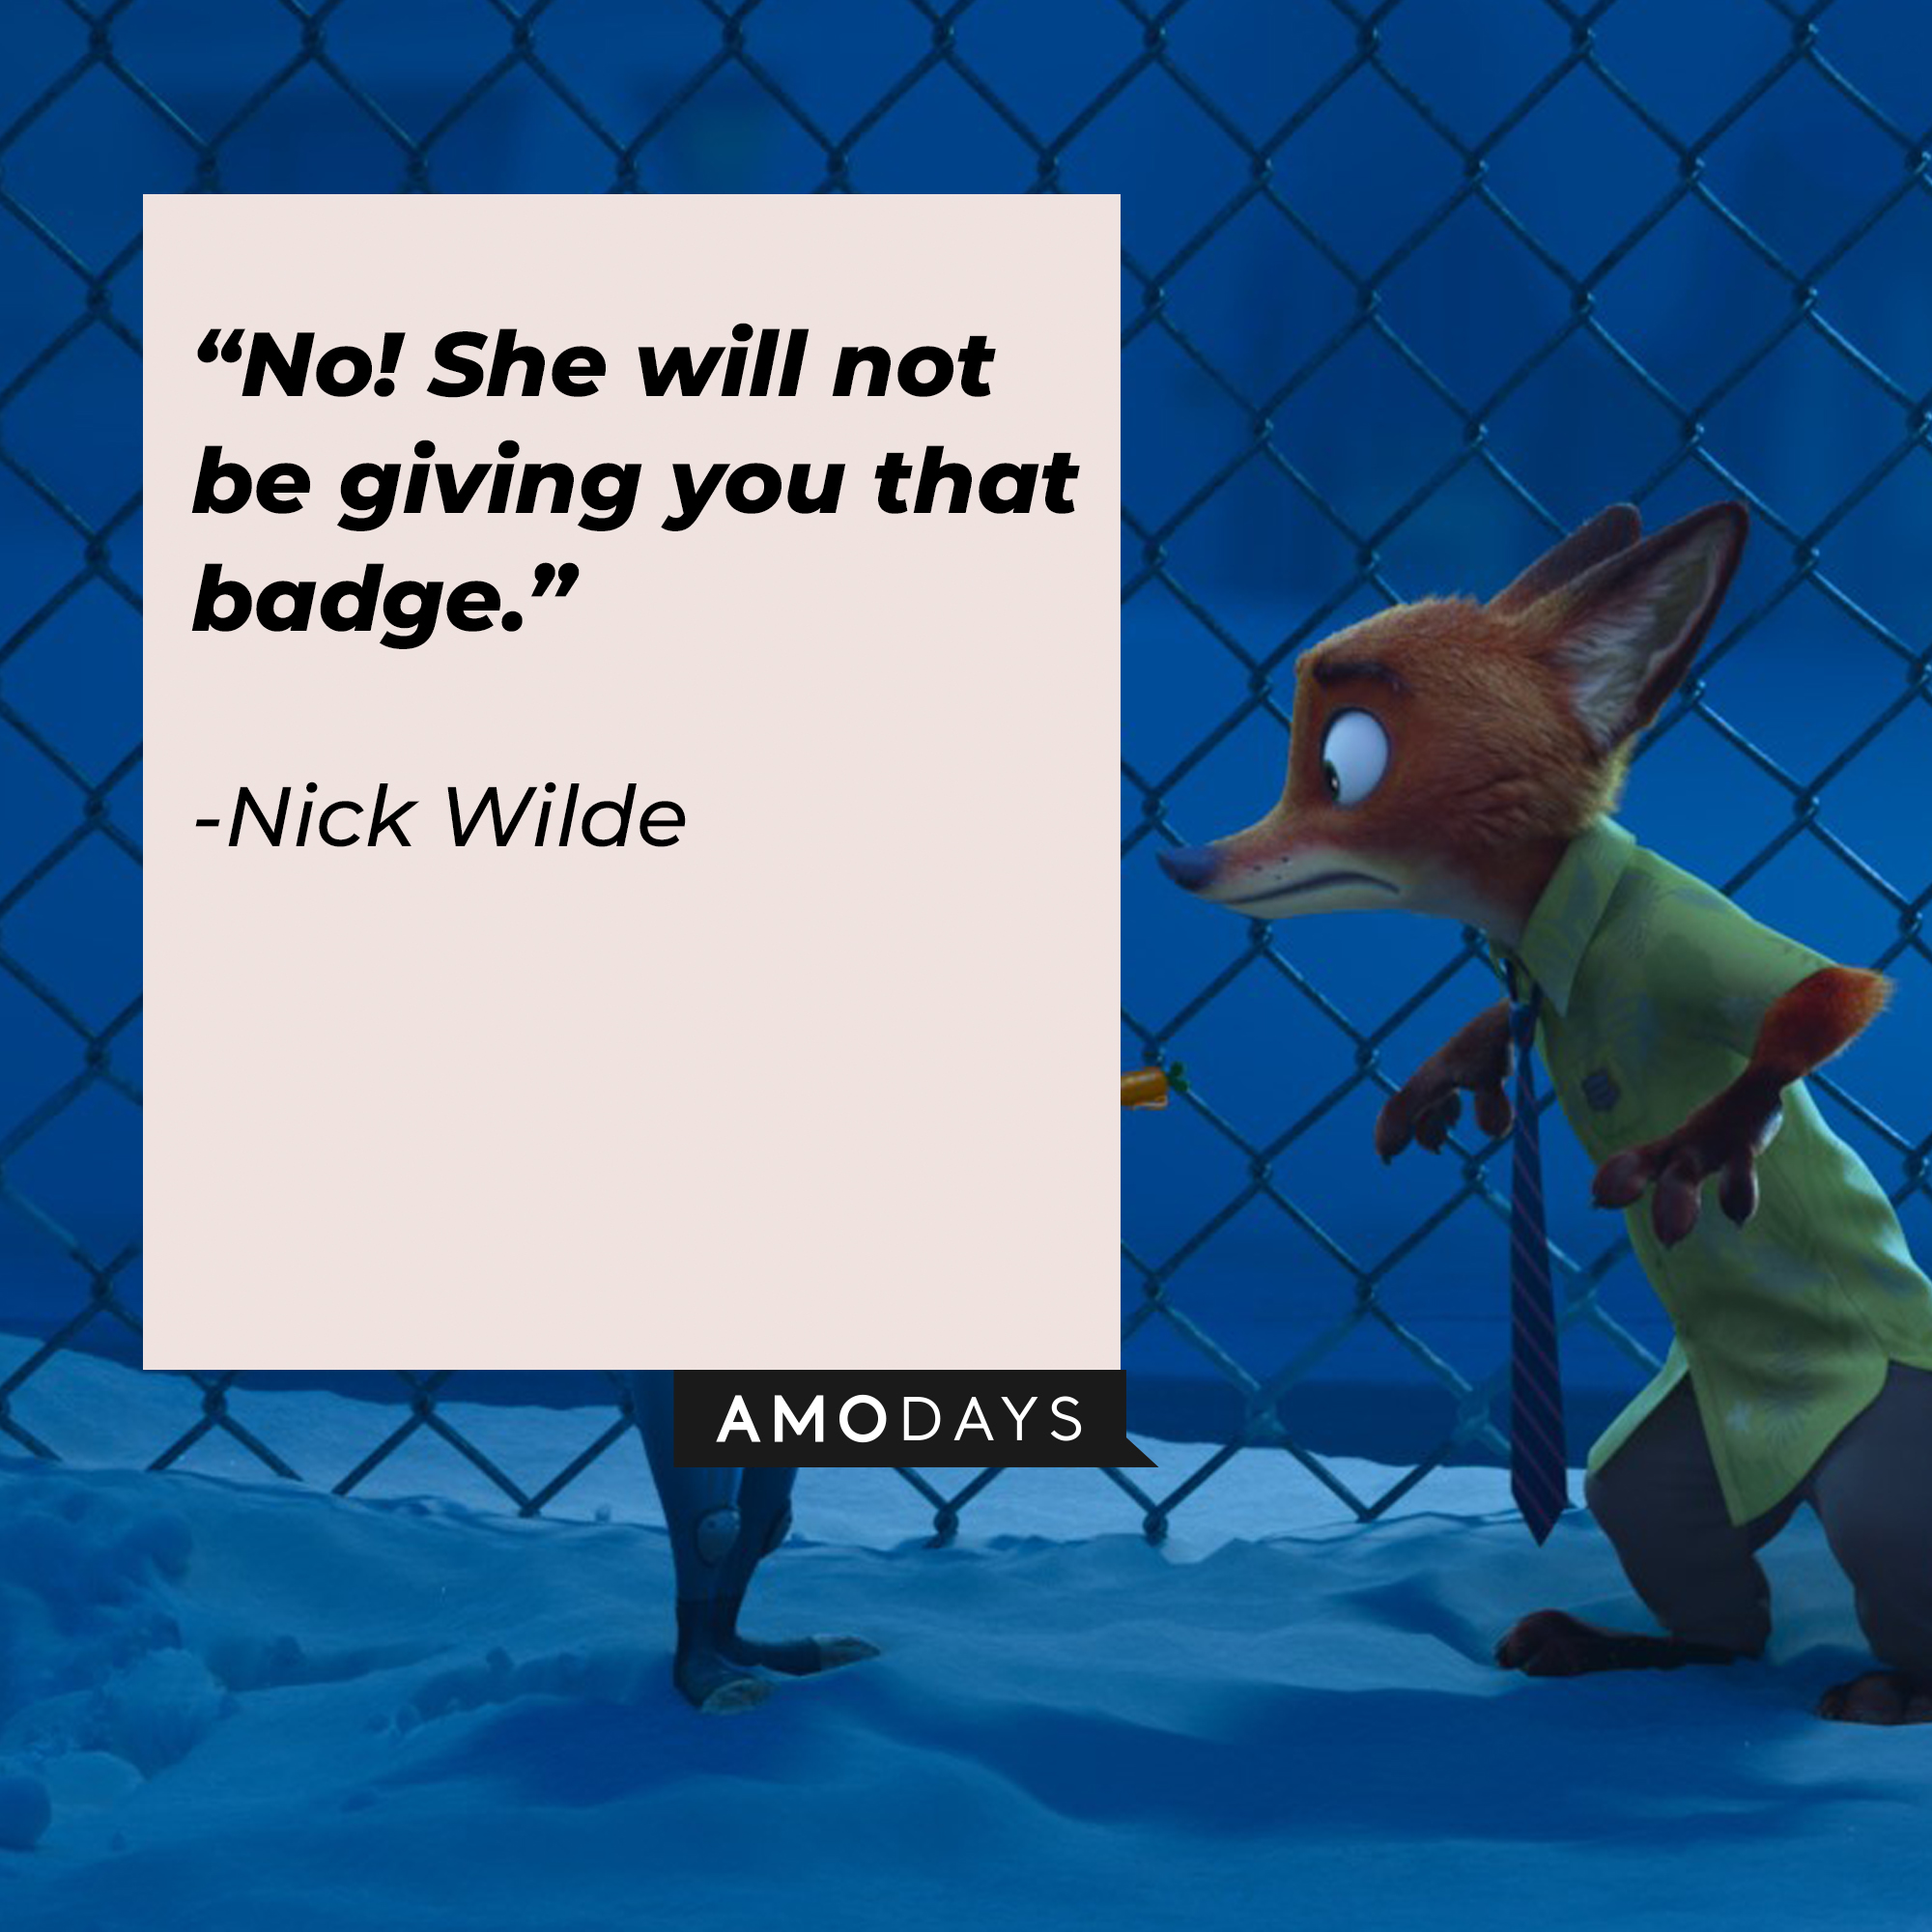 Nick Wilde, with his quote: "No! She will not be giving you that badge.” | Source:  facebook.com/DisneyZootopia